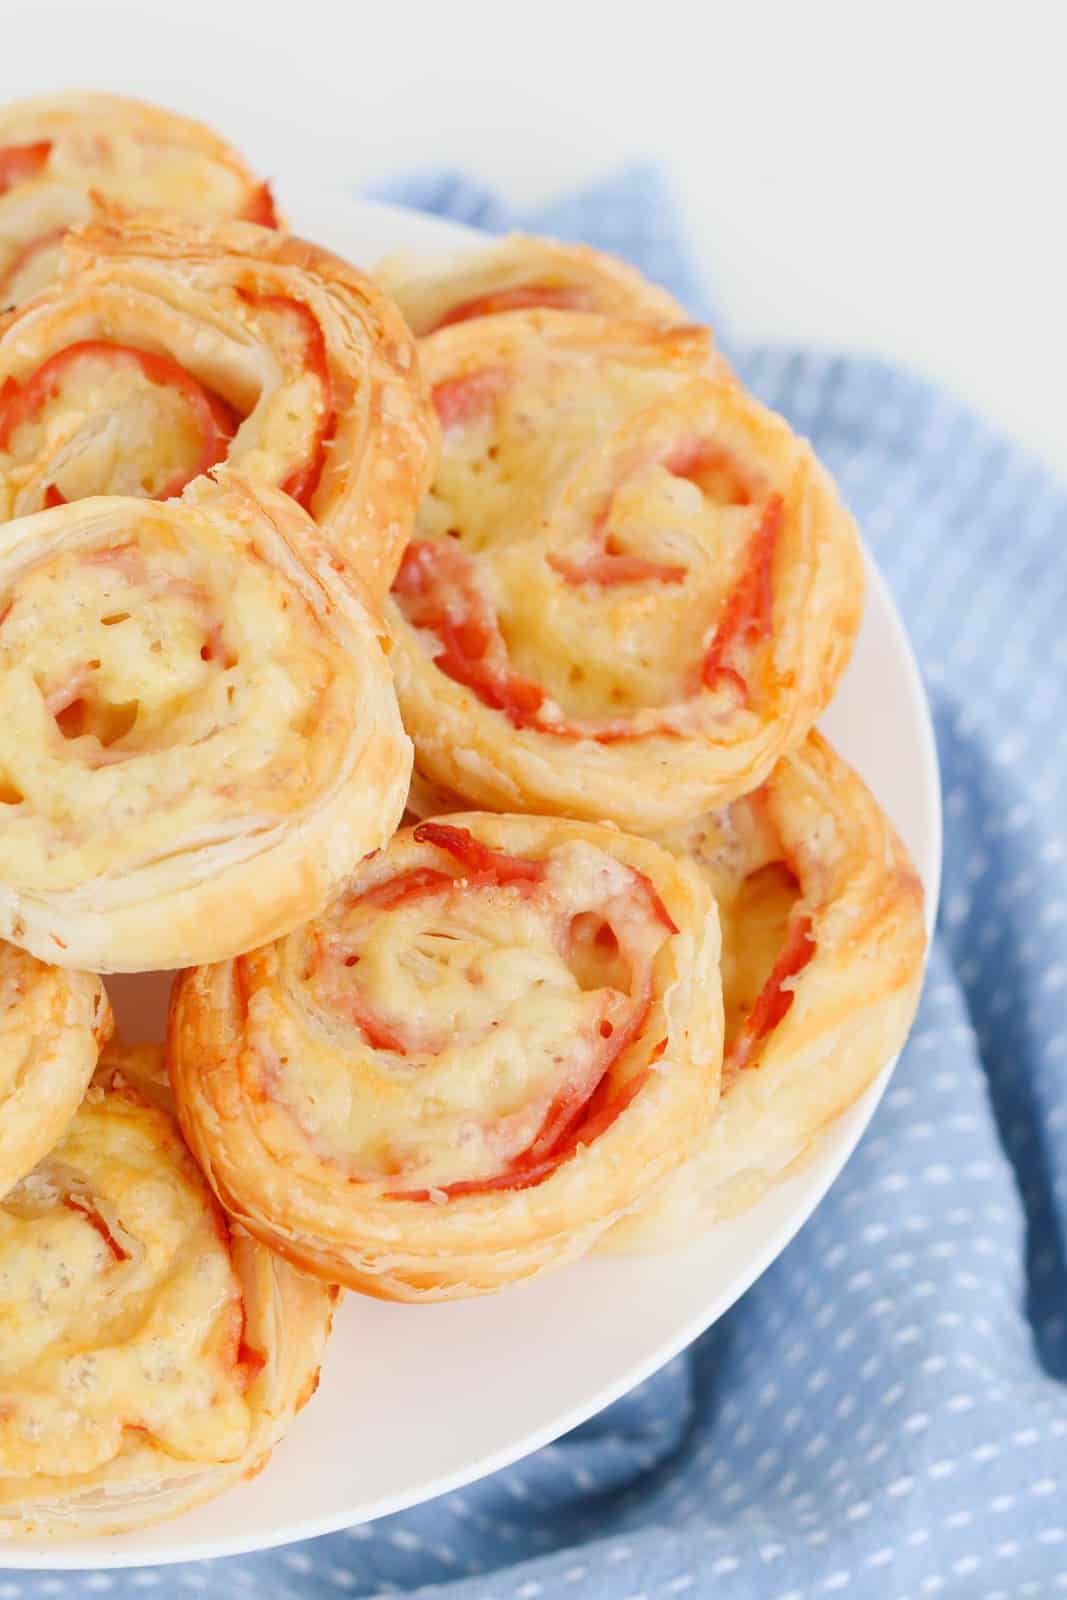 Ham and cheese roll ups in a pile on a plate.